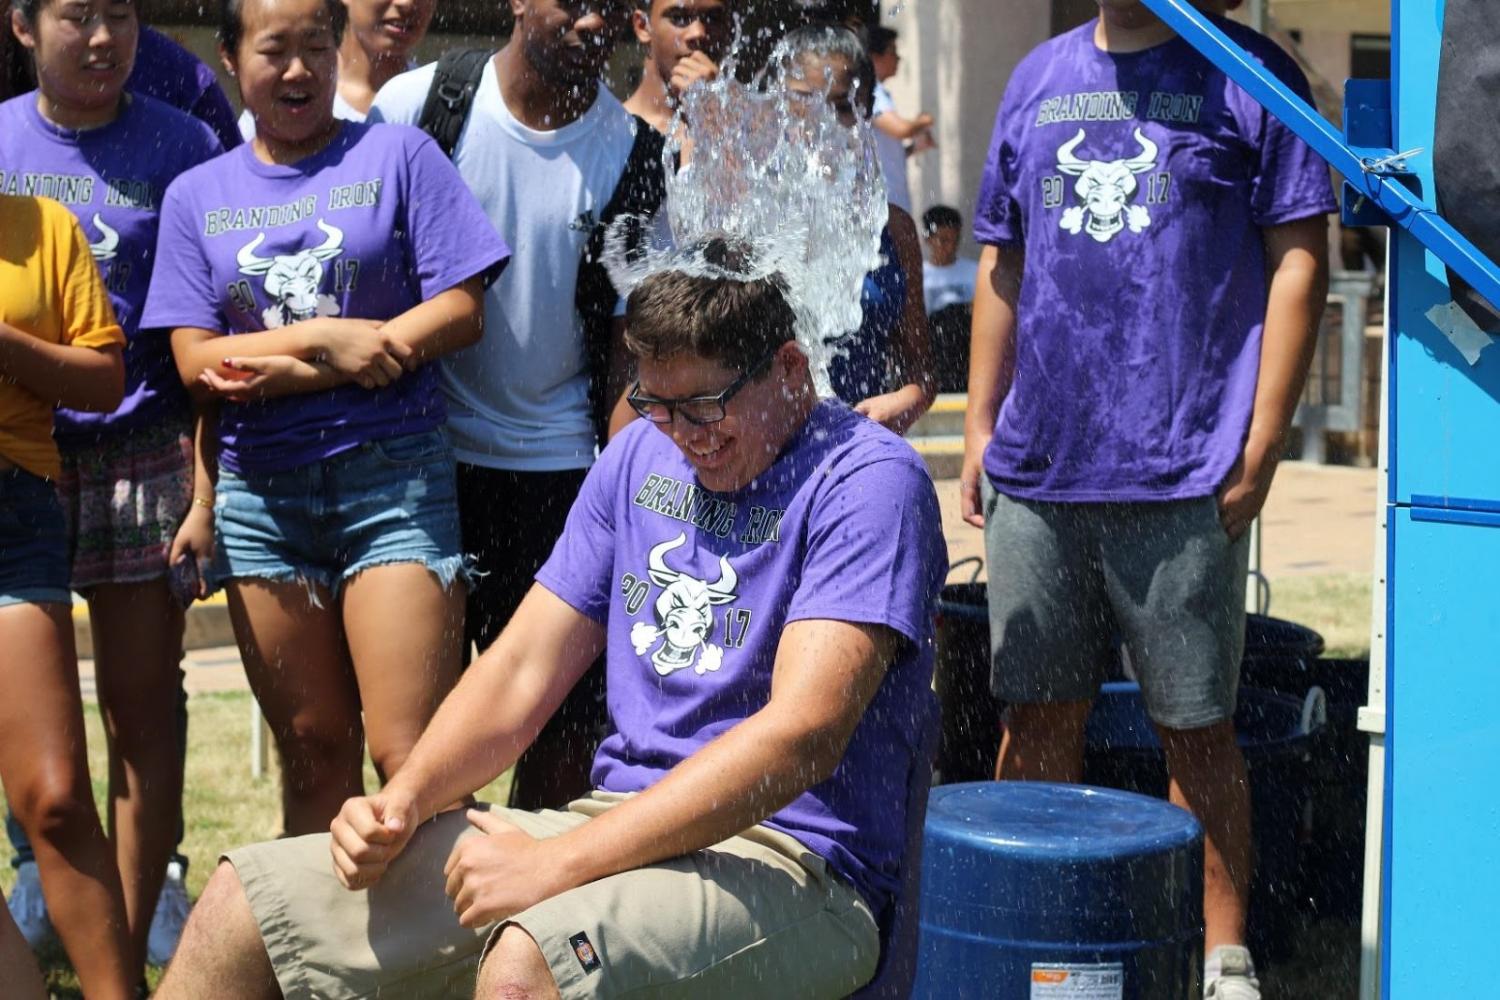 Senior Matthew Rodriguez is dunked with water while participating in Branding Iron activities at lunch in the upper quad.